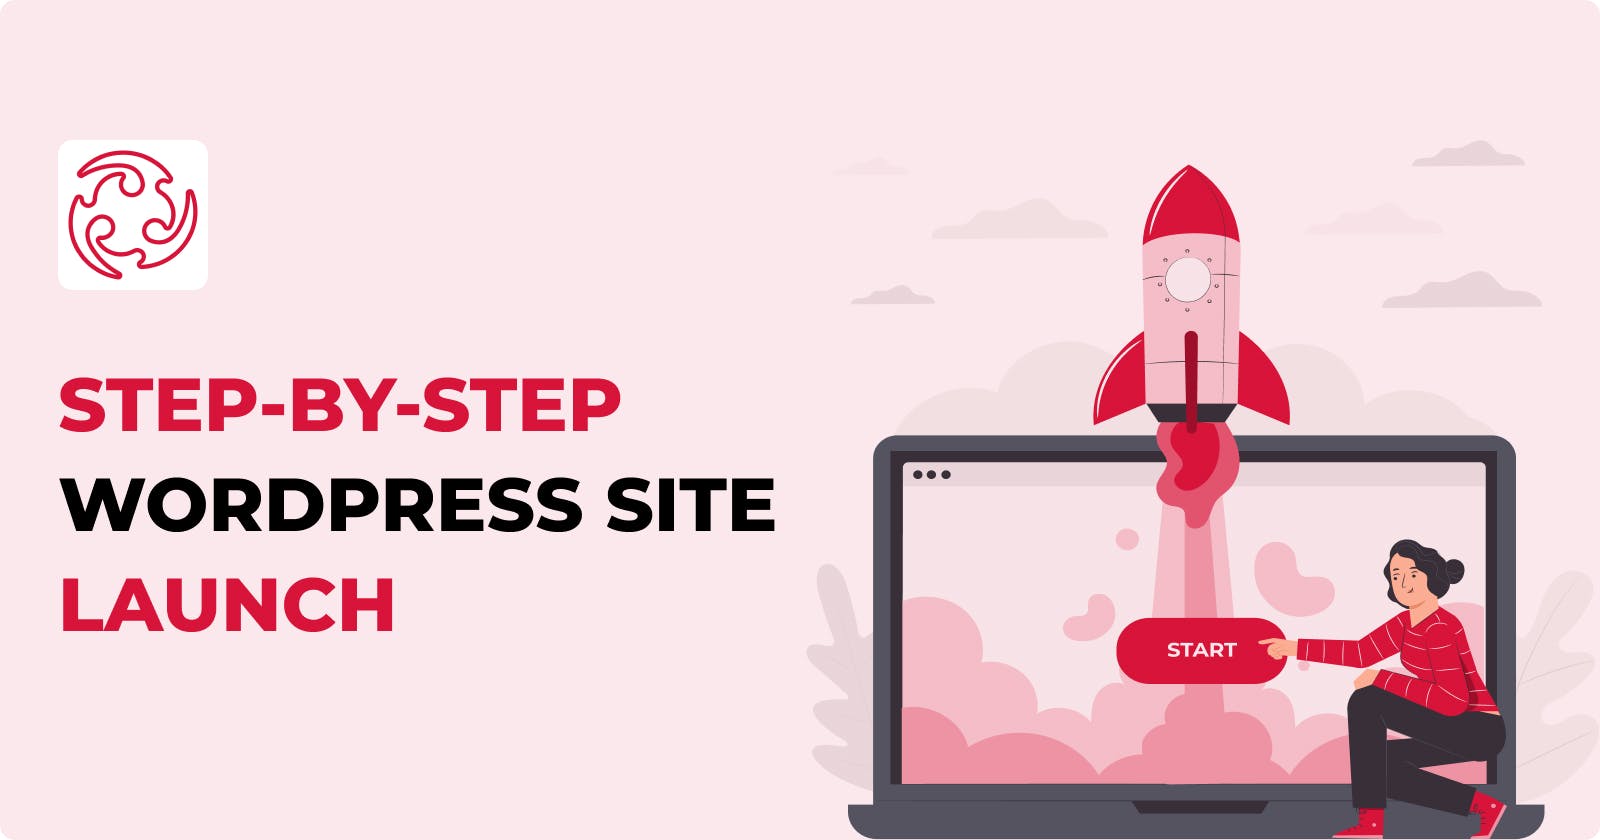 Step-by-Step WordPress Site Launch